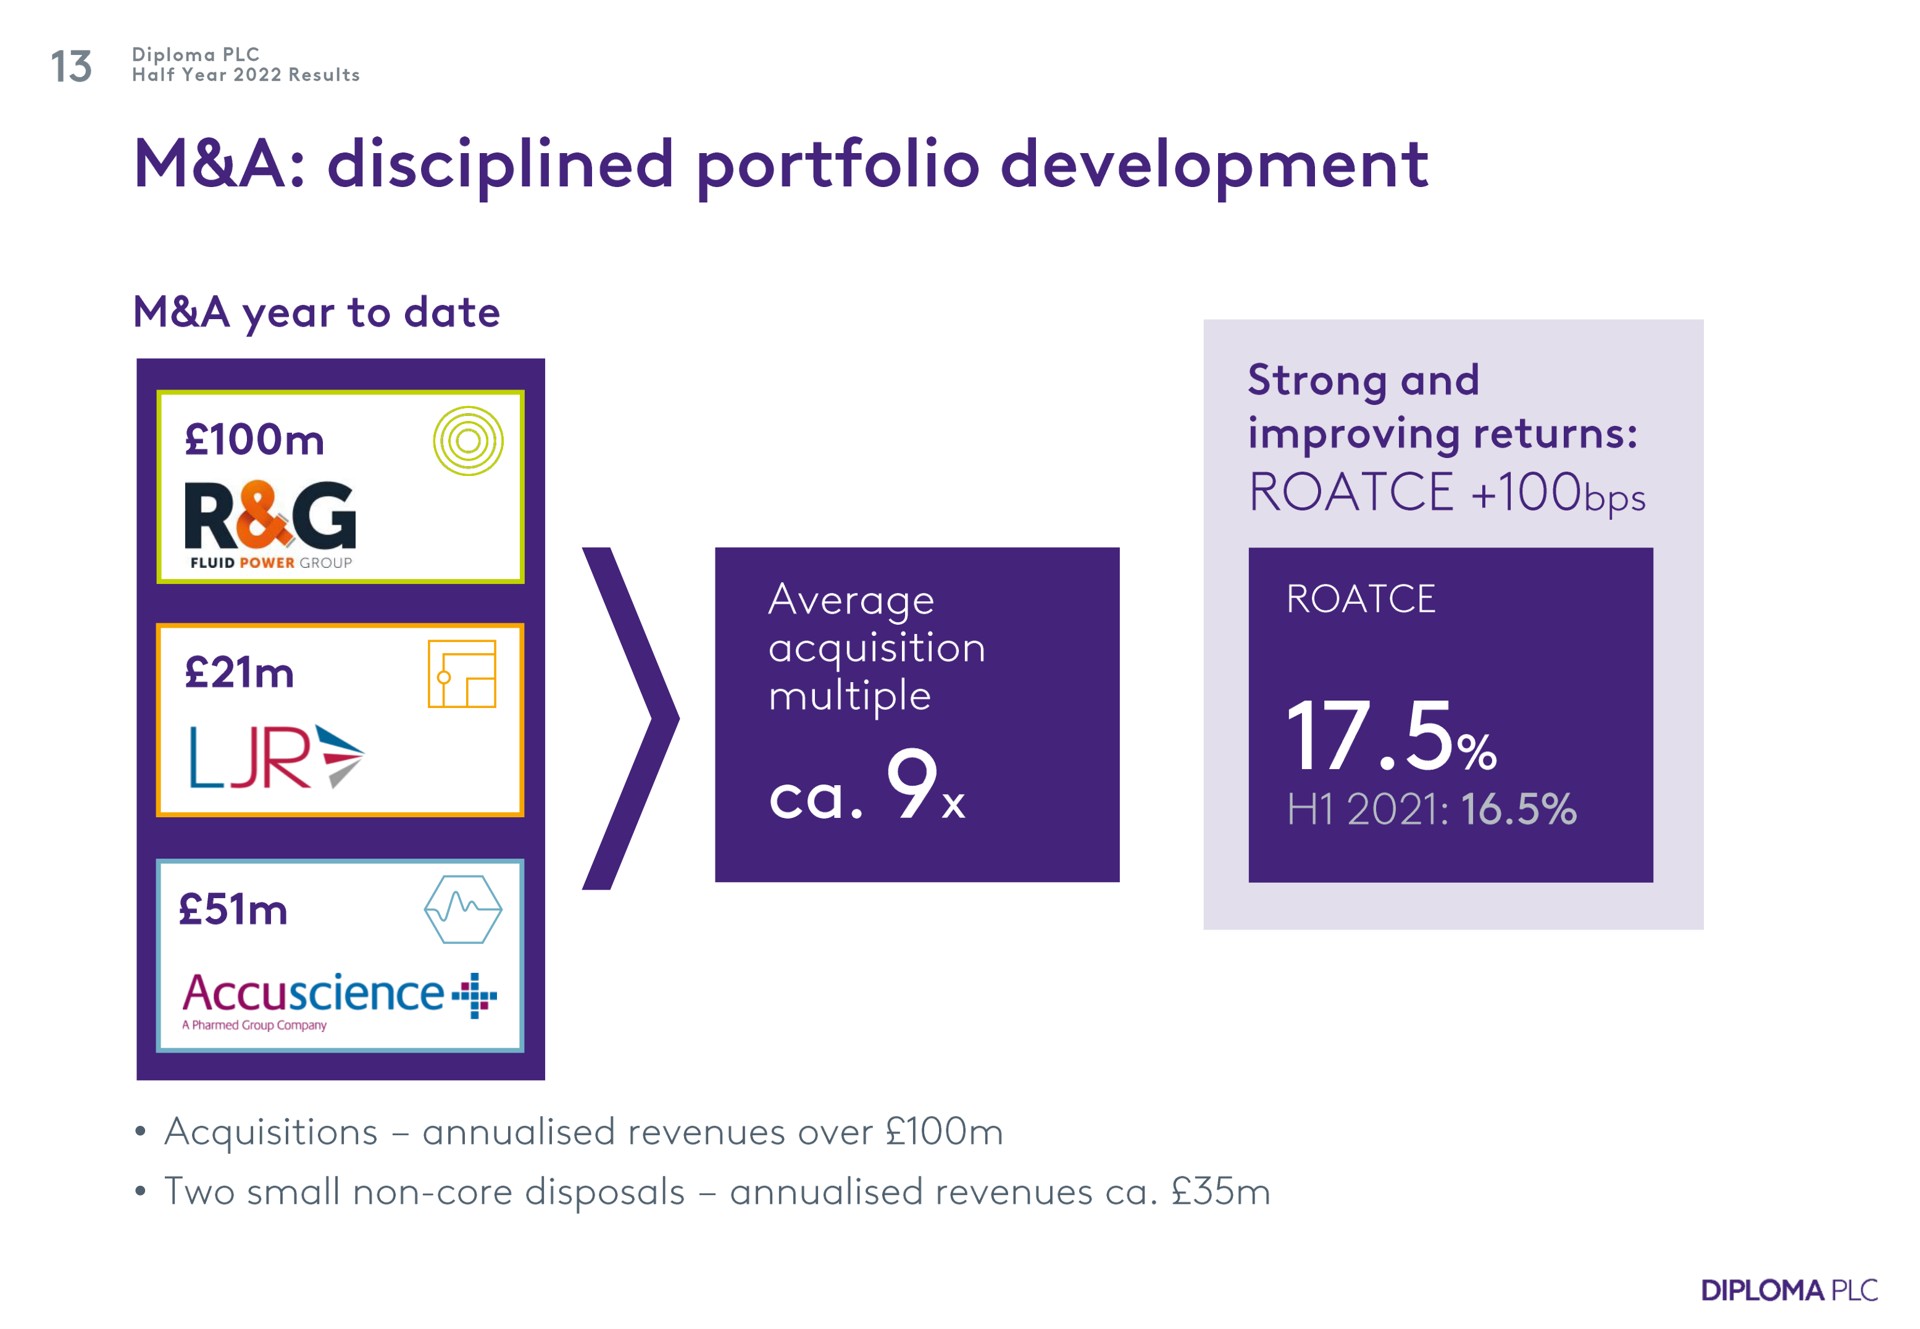 a disciplined portfolio development a year to date strong and improving returns average acquisition multiple acquisitions revenues over two small non core disposals revenues | Diploma